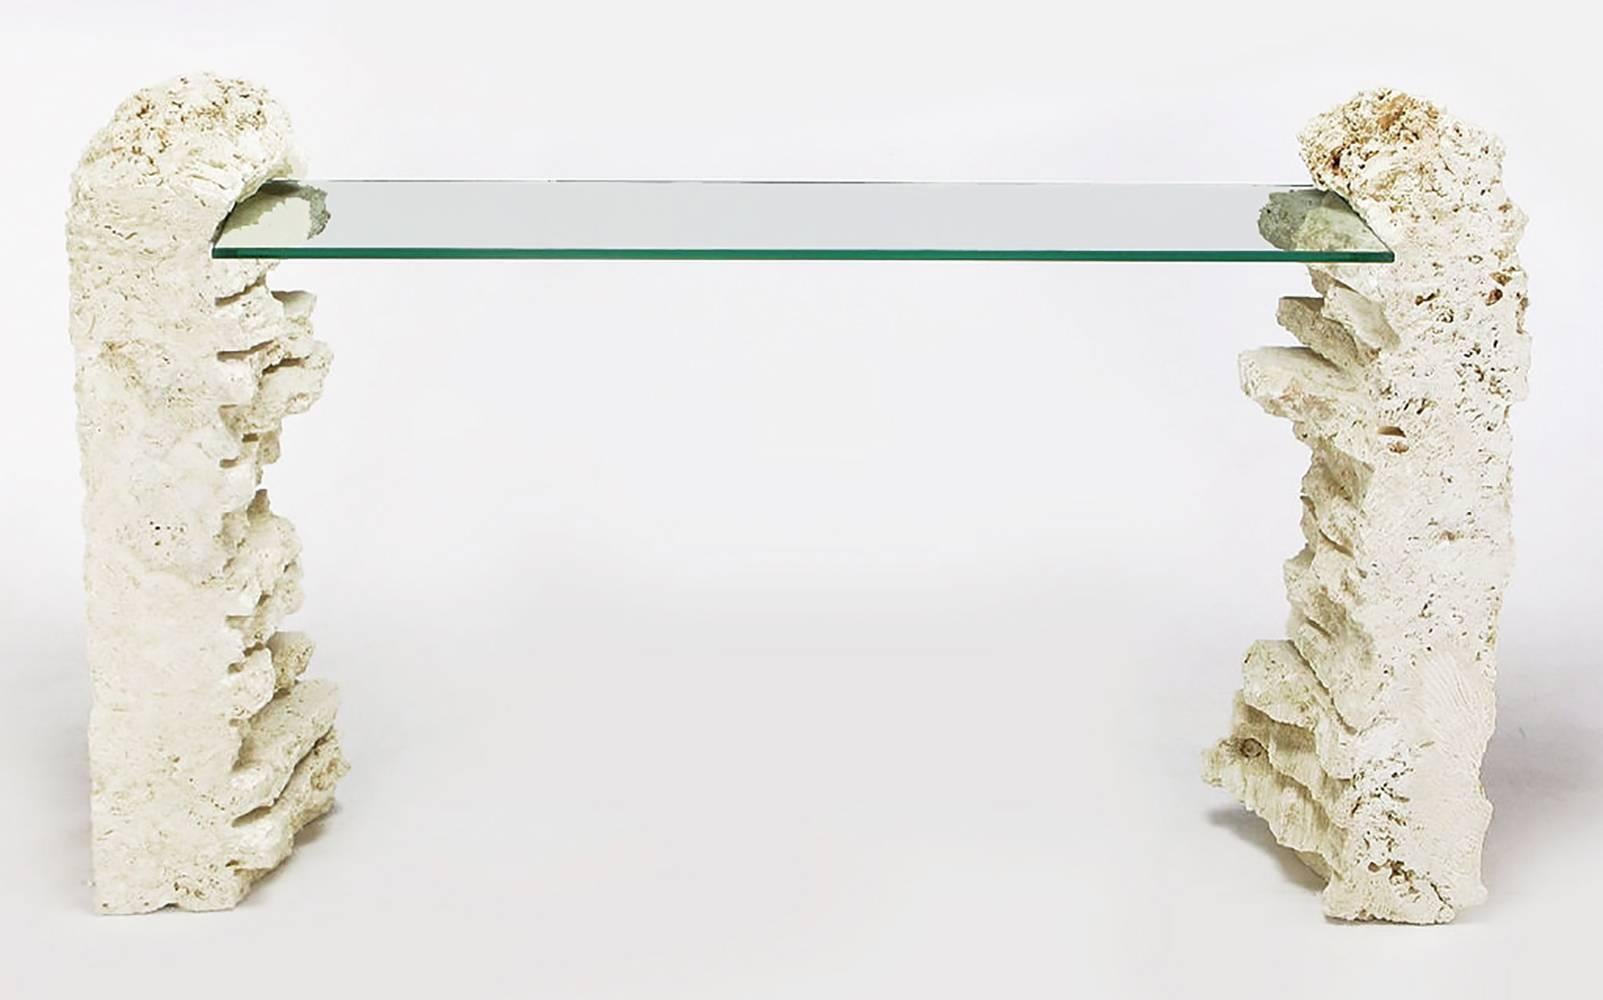 Natural rough-hewn fossilized coral stone pillars cut to form an organic piece of furniture. This console table consists of fossilized coral stone that has been scored and unfinished to give the appearance of found pieces. The glass top is 12